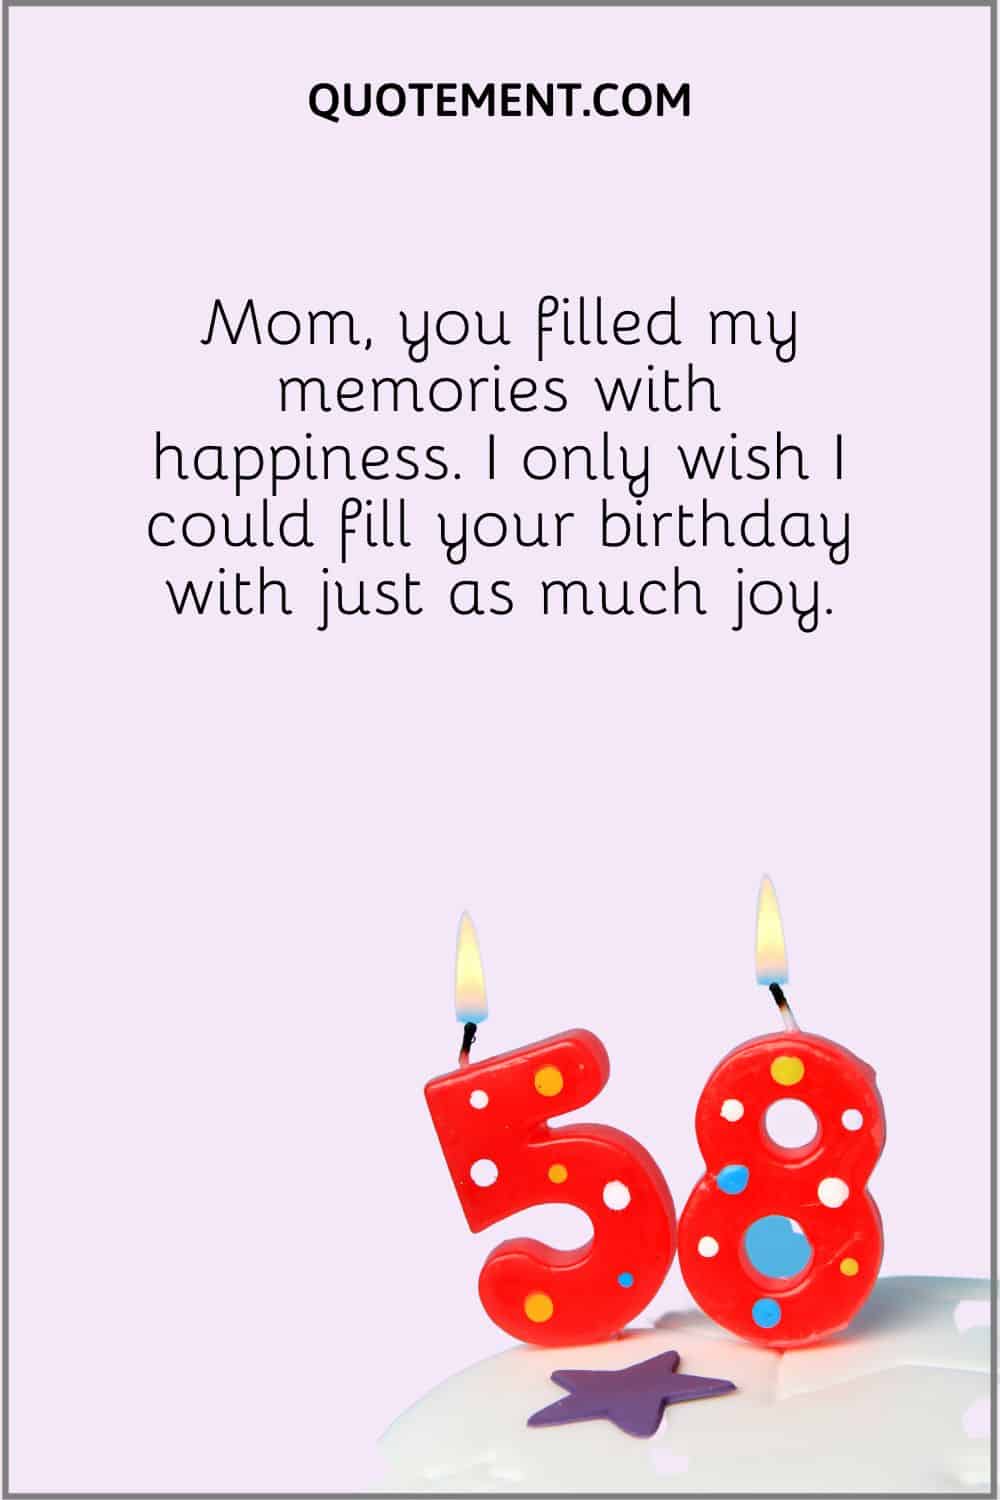 “Mom, you filled my memories with happiness. I only wish I could fill your birthday with just as much joy.”